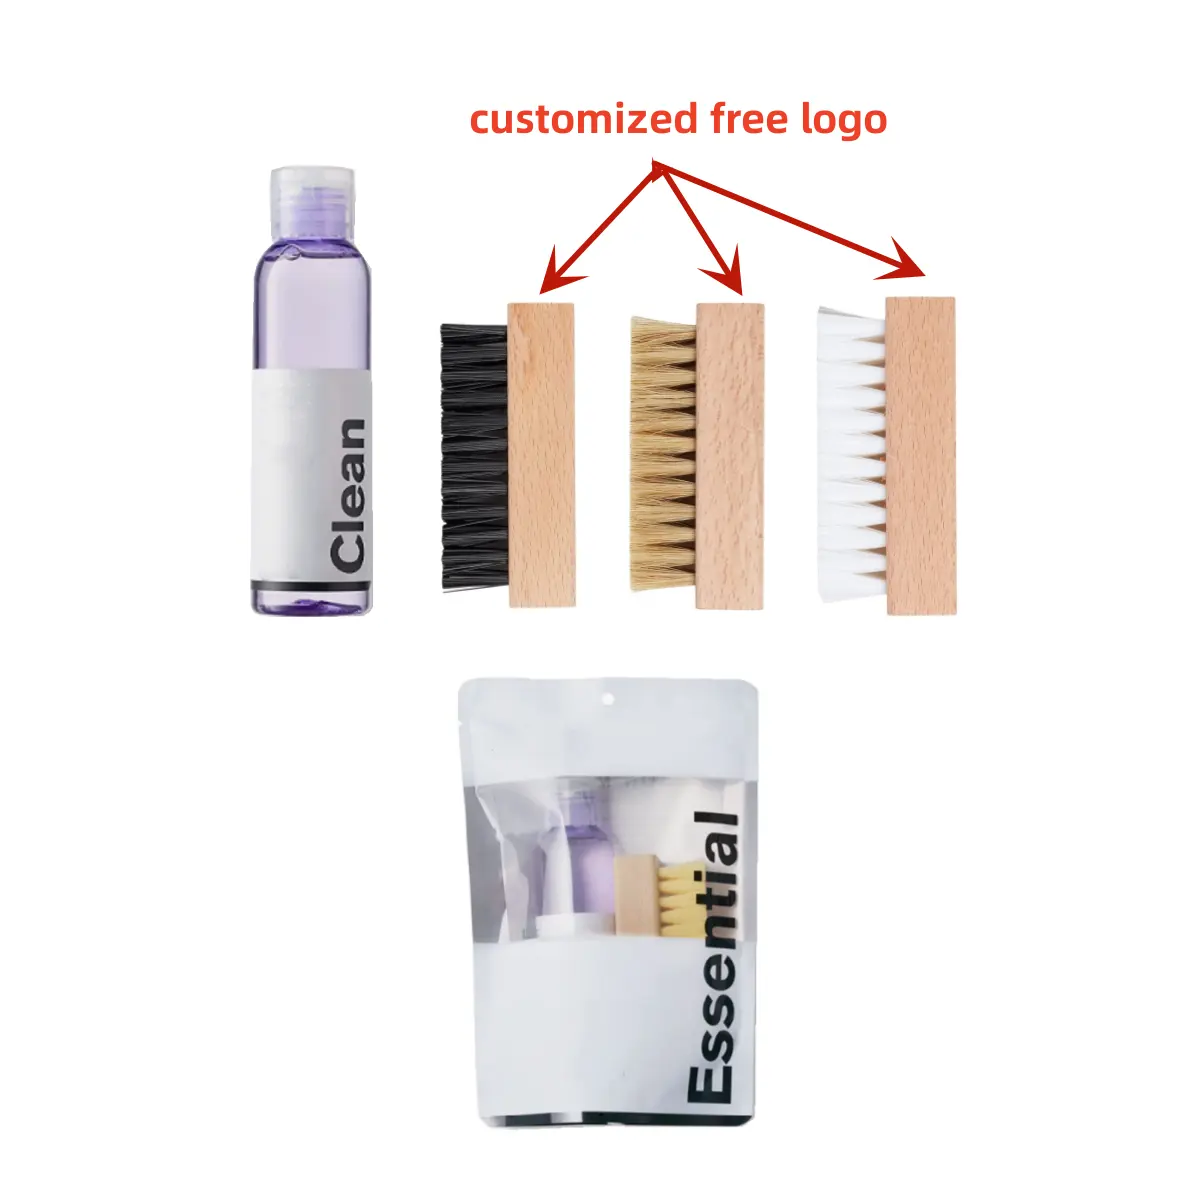 Factory Supply Custom Free Logo Wood Sneaker Brush Liquid Cleaning Solution White Sneaker Cleaner Shoe Cleaner Kit for Cleaning